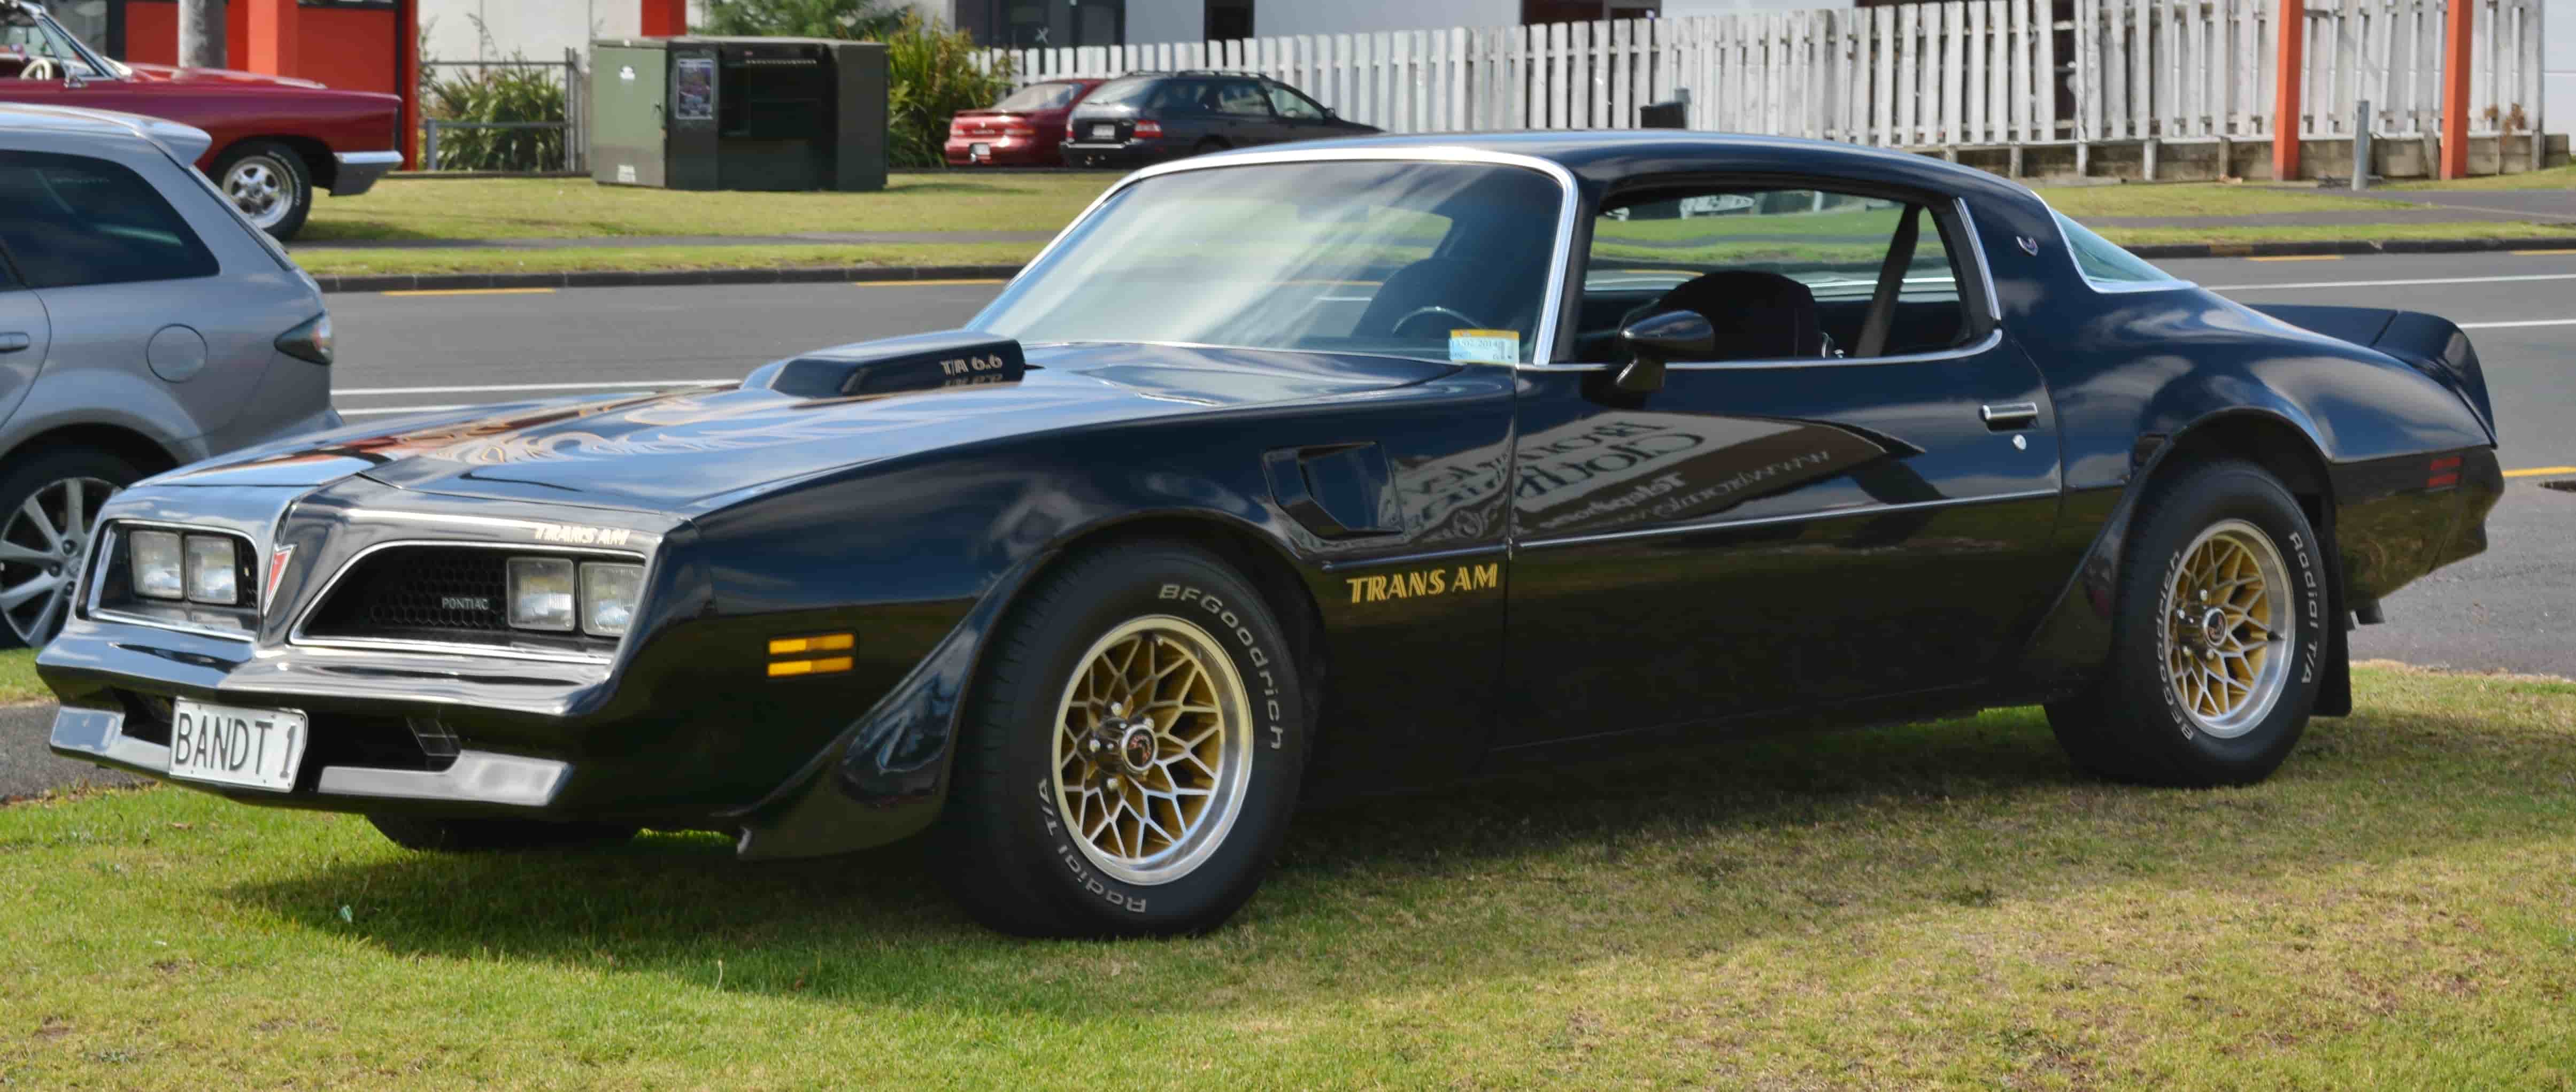 BO ‘THE BANDIT’ DARVILLE’S 1977 PONTIAC TRANS AM FRONT